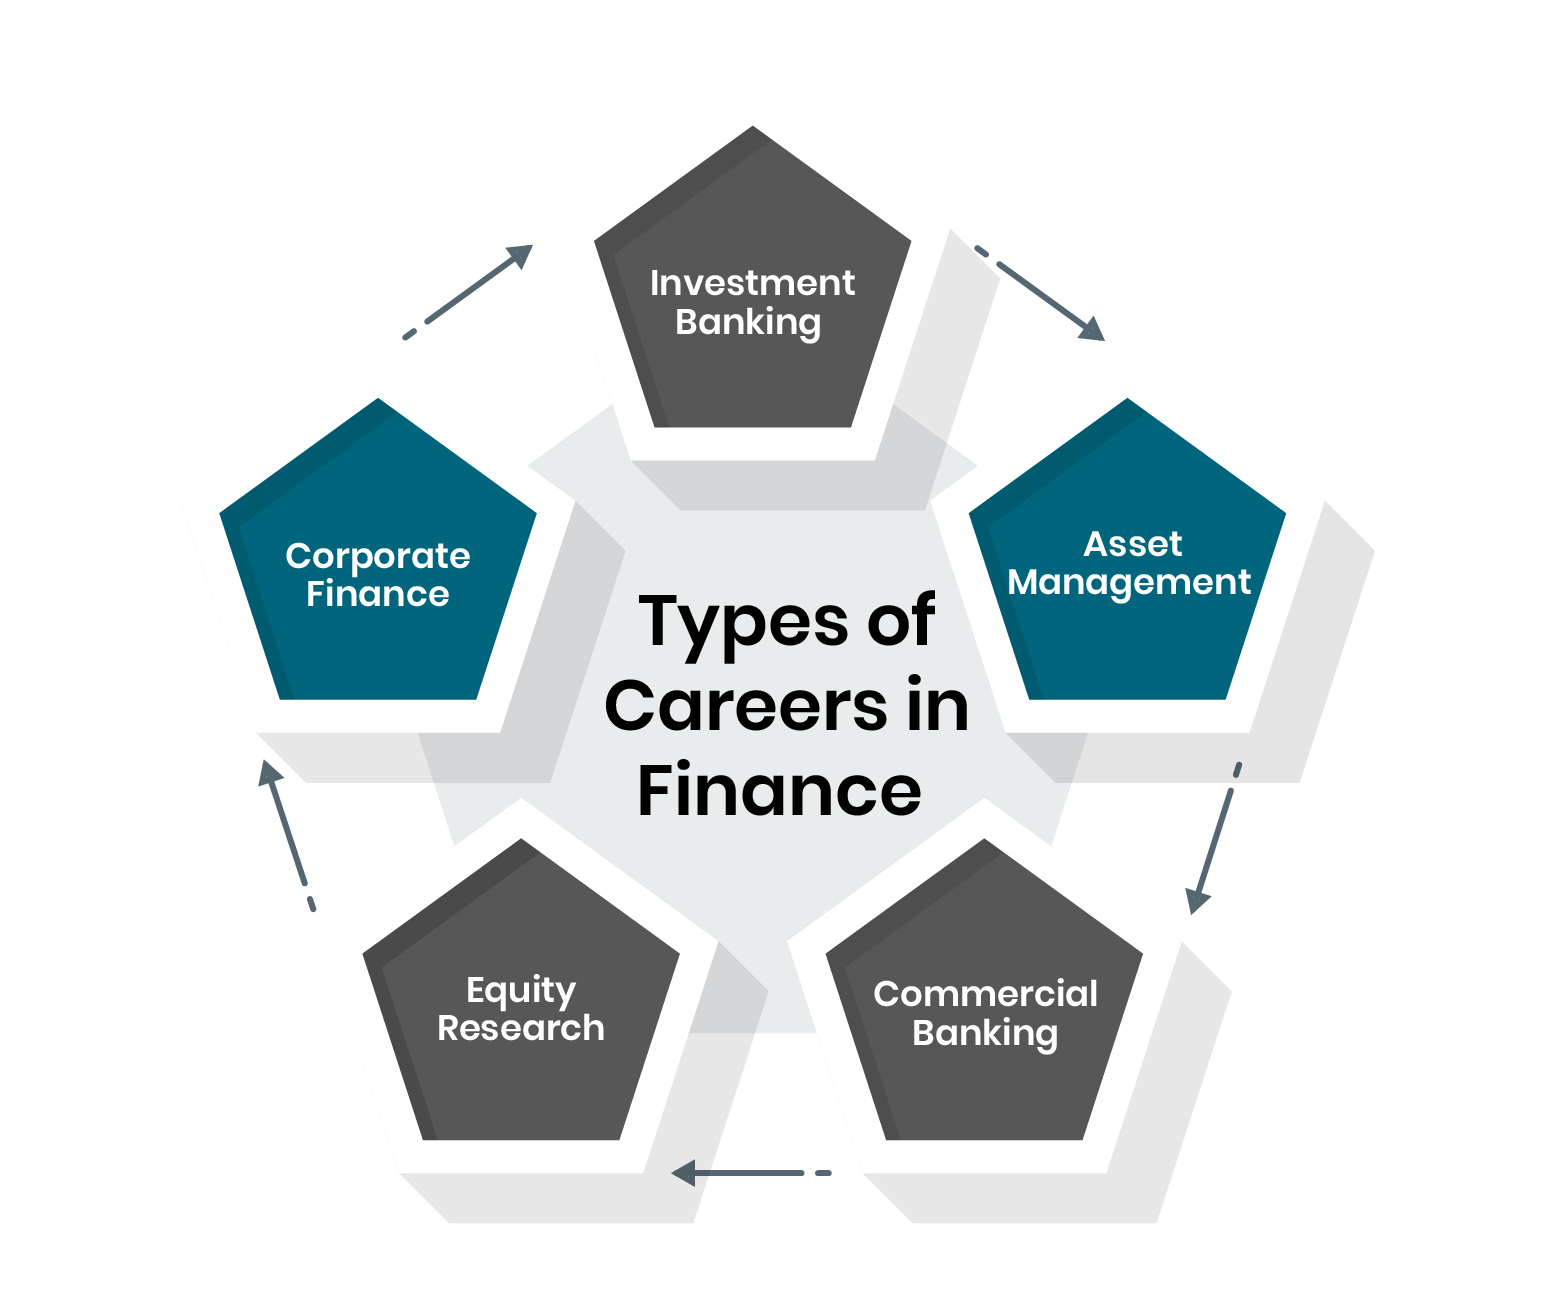 Types of Careers in Finance